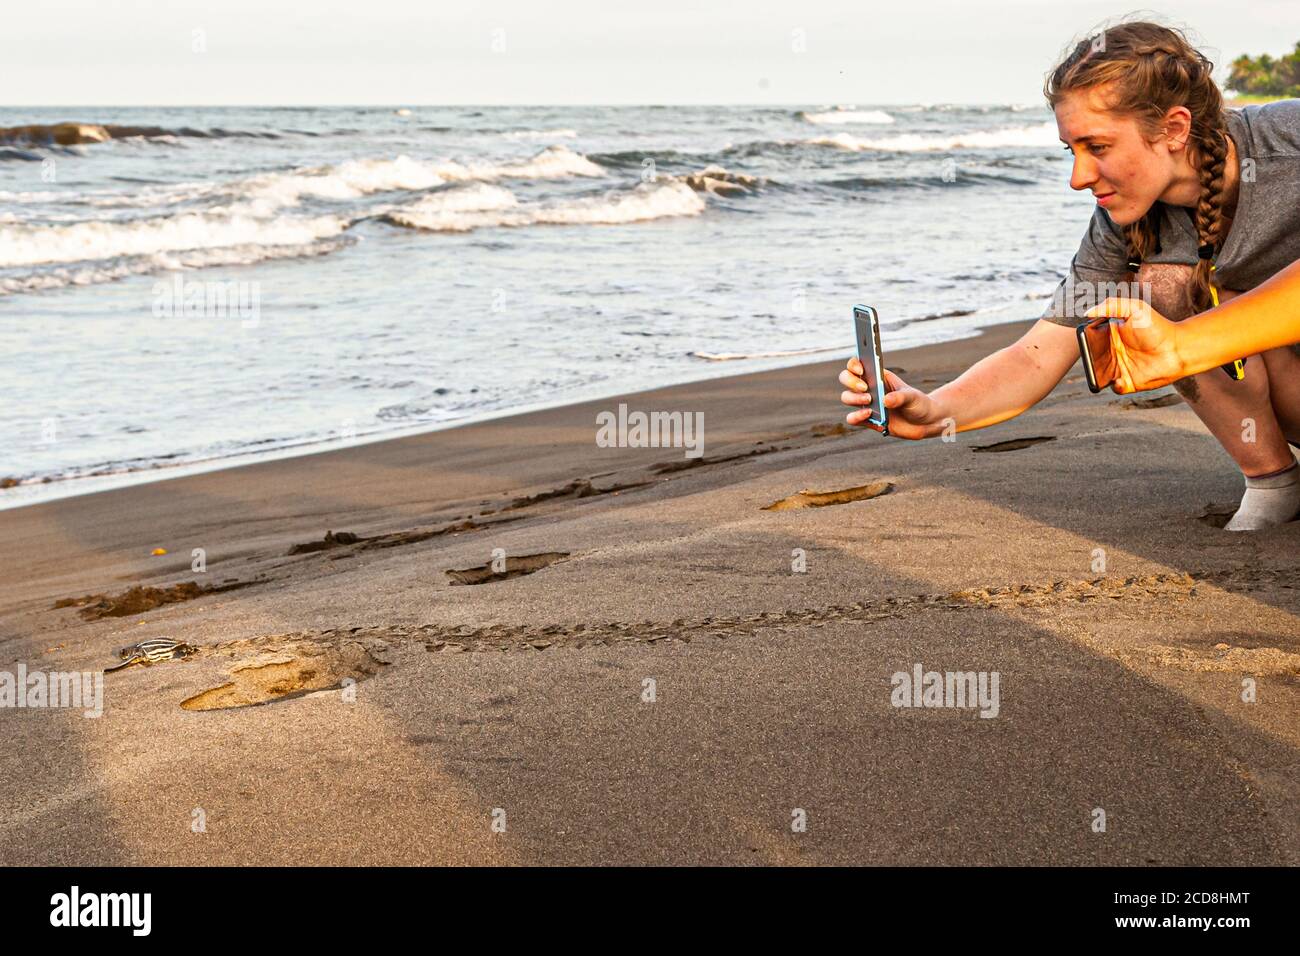 Hatchling heading for the Ocean. Biosphere citizen science project for sea turtles protection in Costa Rica Stock Photo